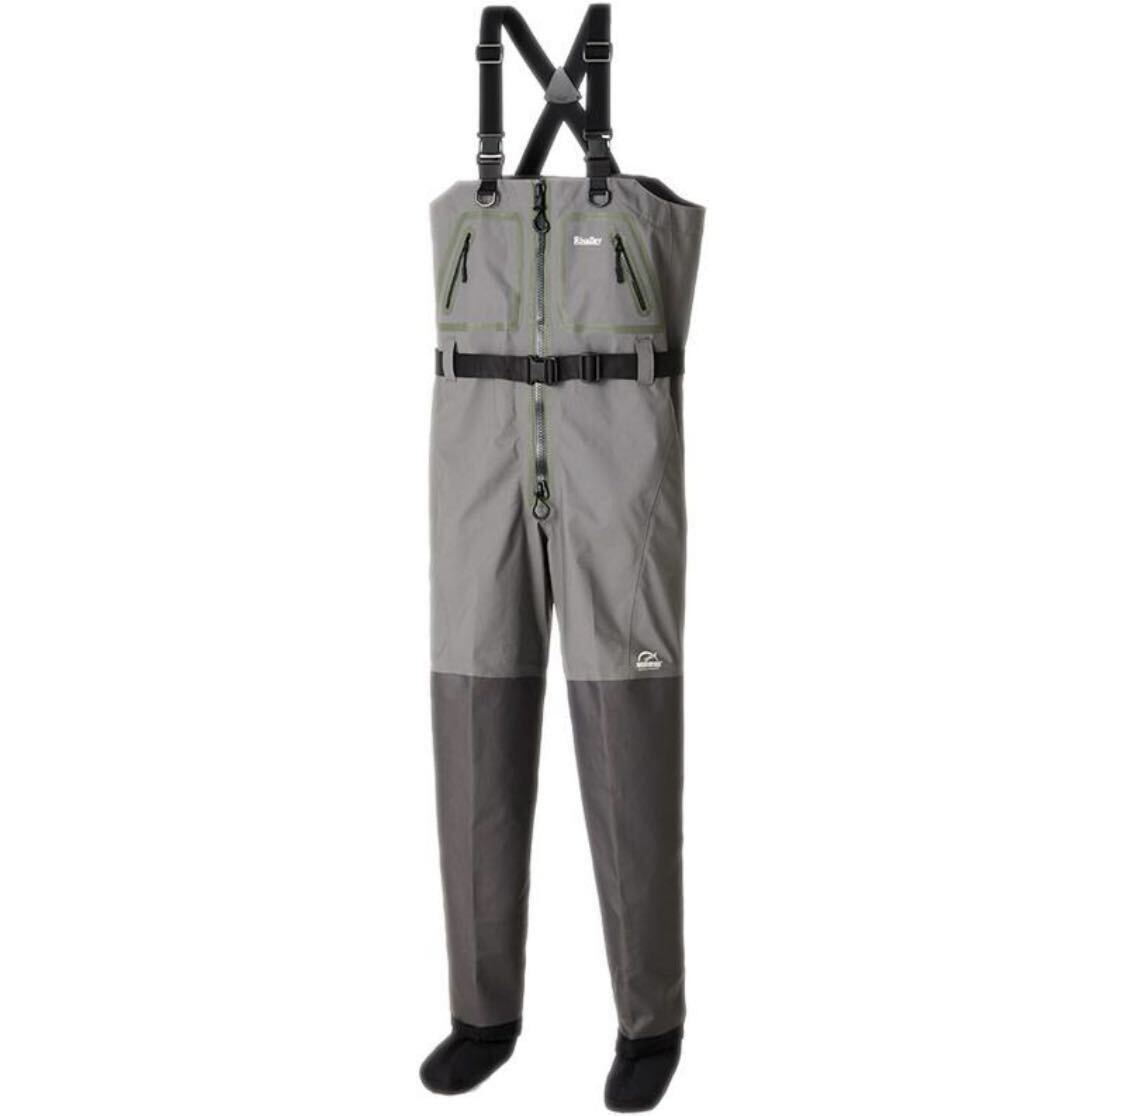 Riivalley Rivalley RV front open stockings waders [ size 3L ] gray waterproof waterproof waders used use 1 times 